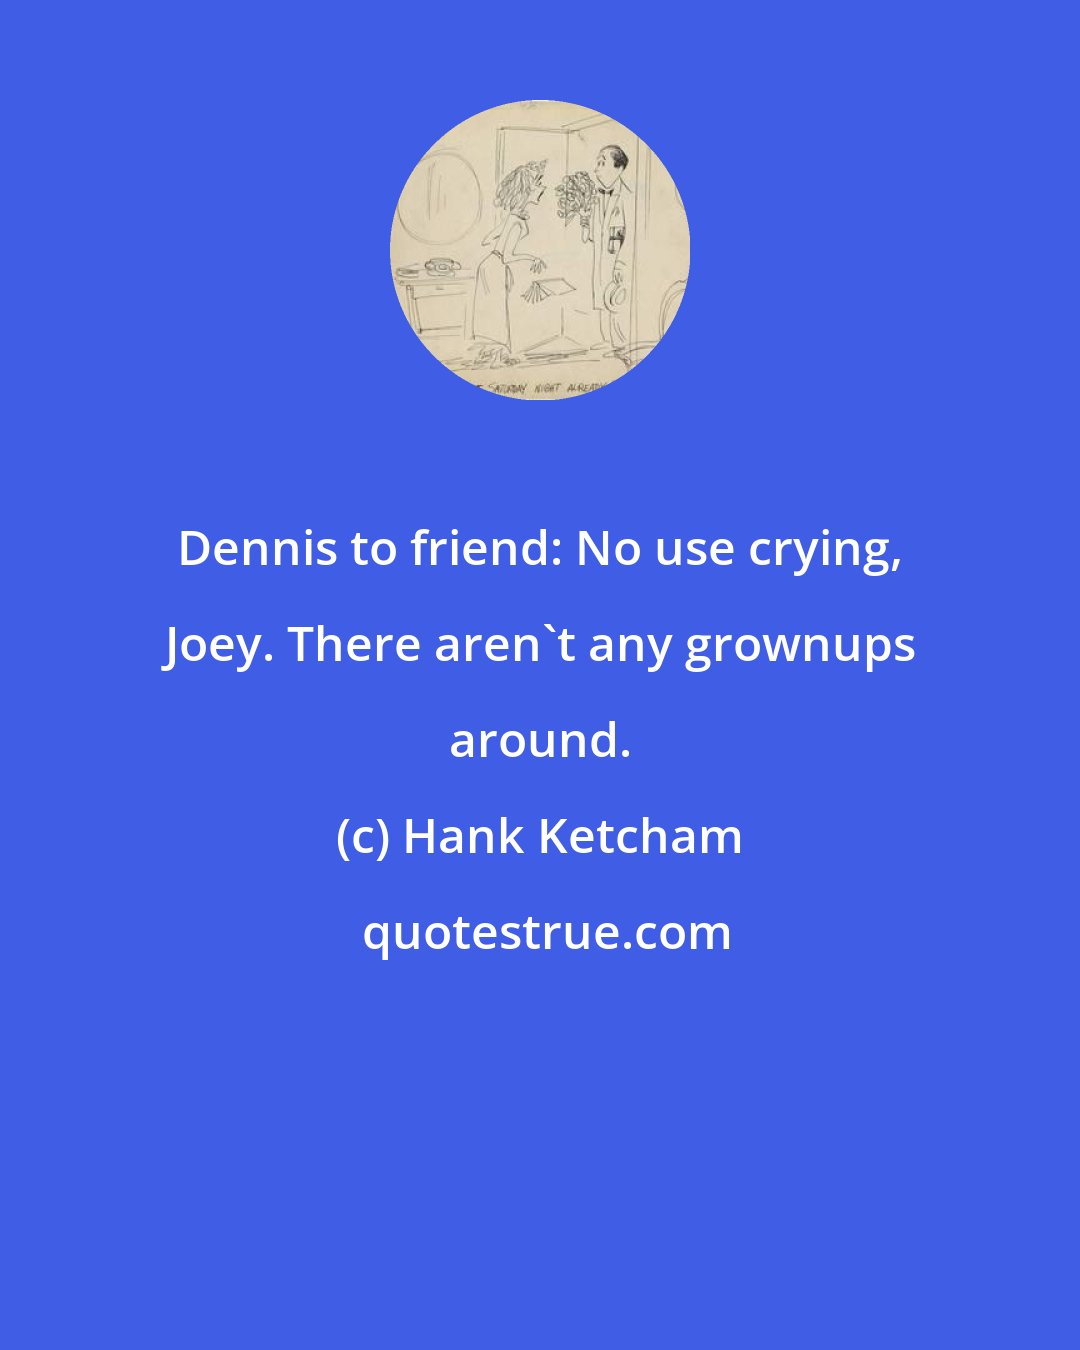 Hank Ketcham: Dennis to friend: No use crying, Joey. There aren't any grownups around.